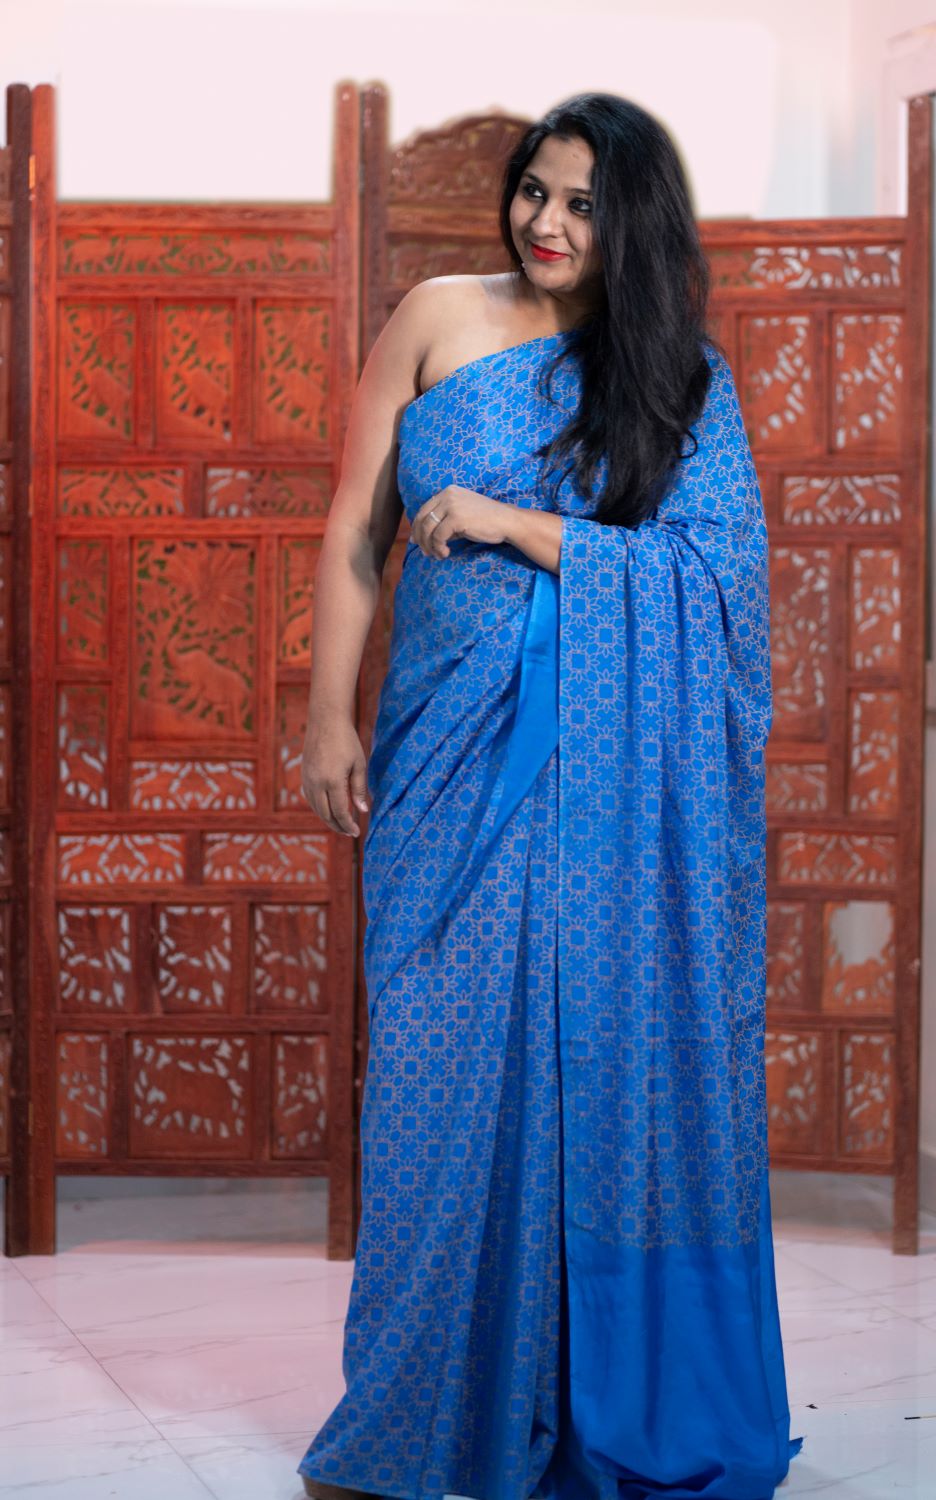 To Me, You're Perfect- Printed Modal Silk Saree- Blue and Copper